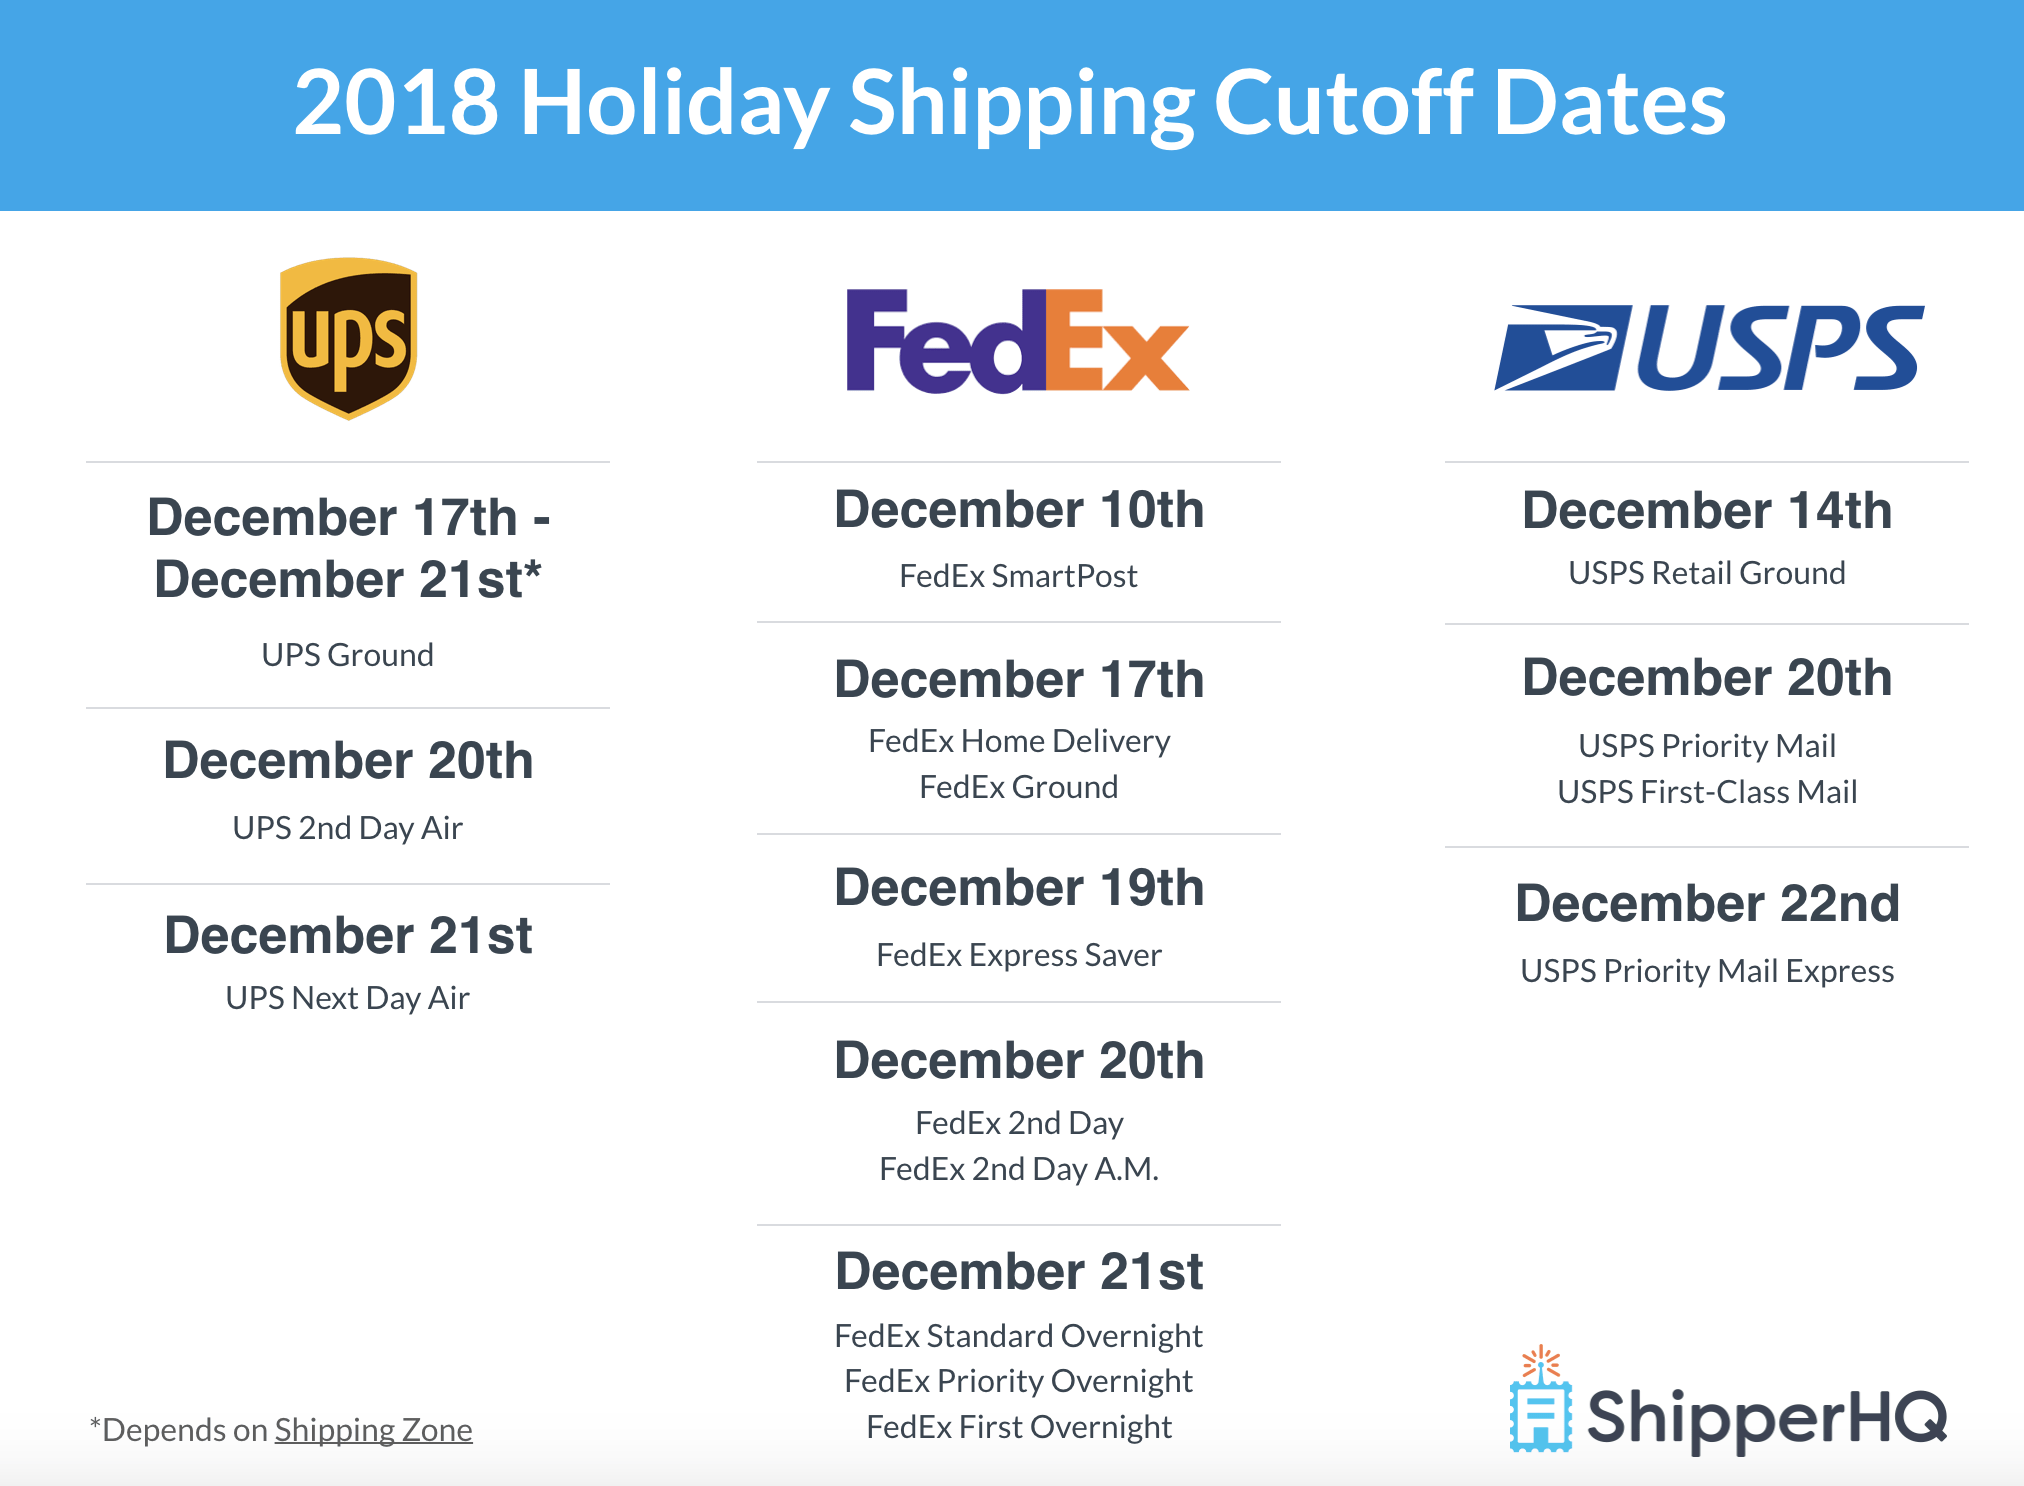 2018 Holiday Shipping Cutoff Dates for UPS, FedEx & More